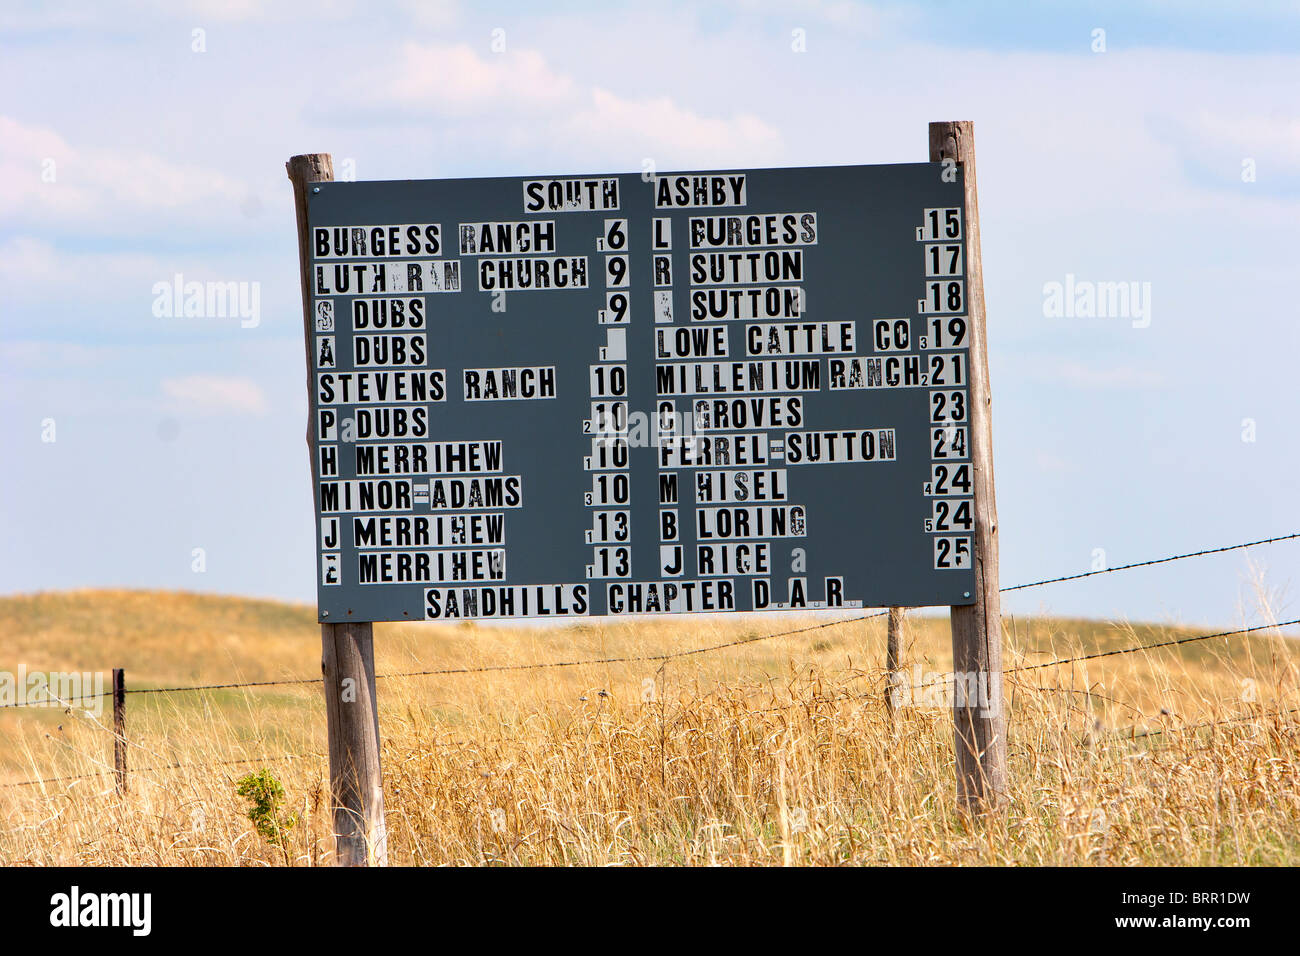 A sign in rural Nebraska marking destinations along a mostly disused road, May 29. 2010. Stock Photo